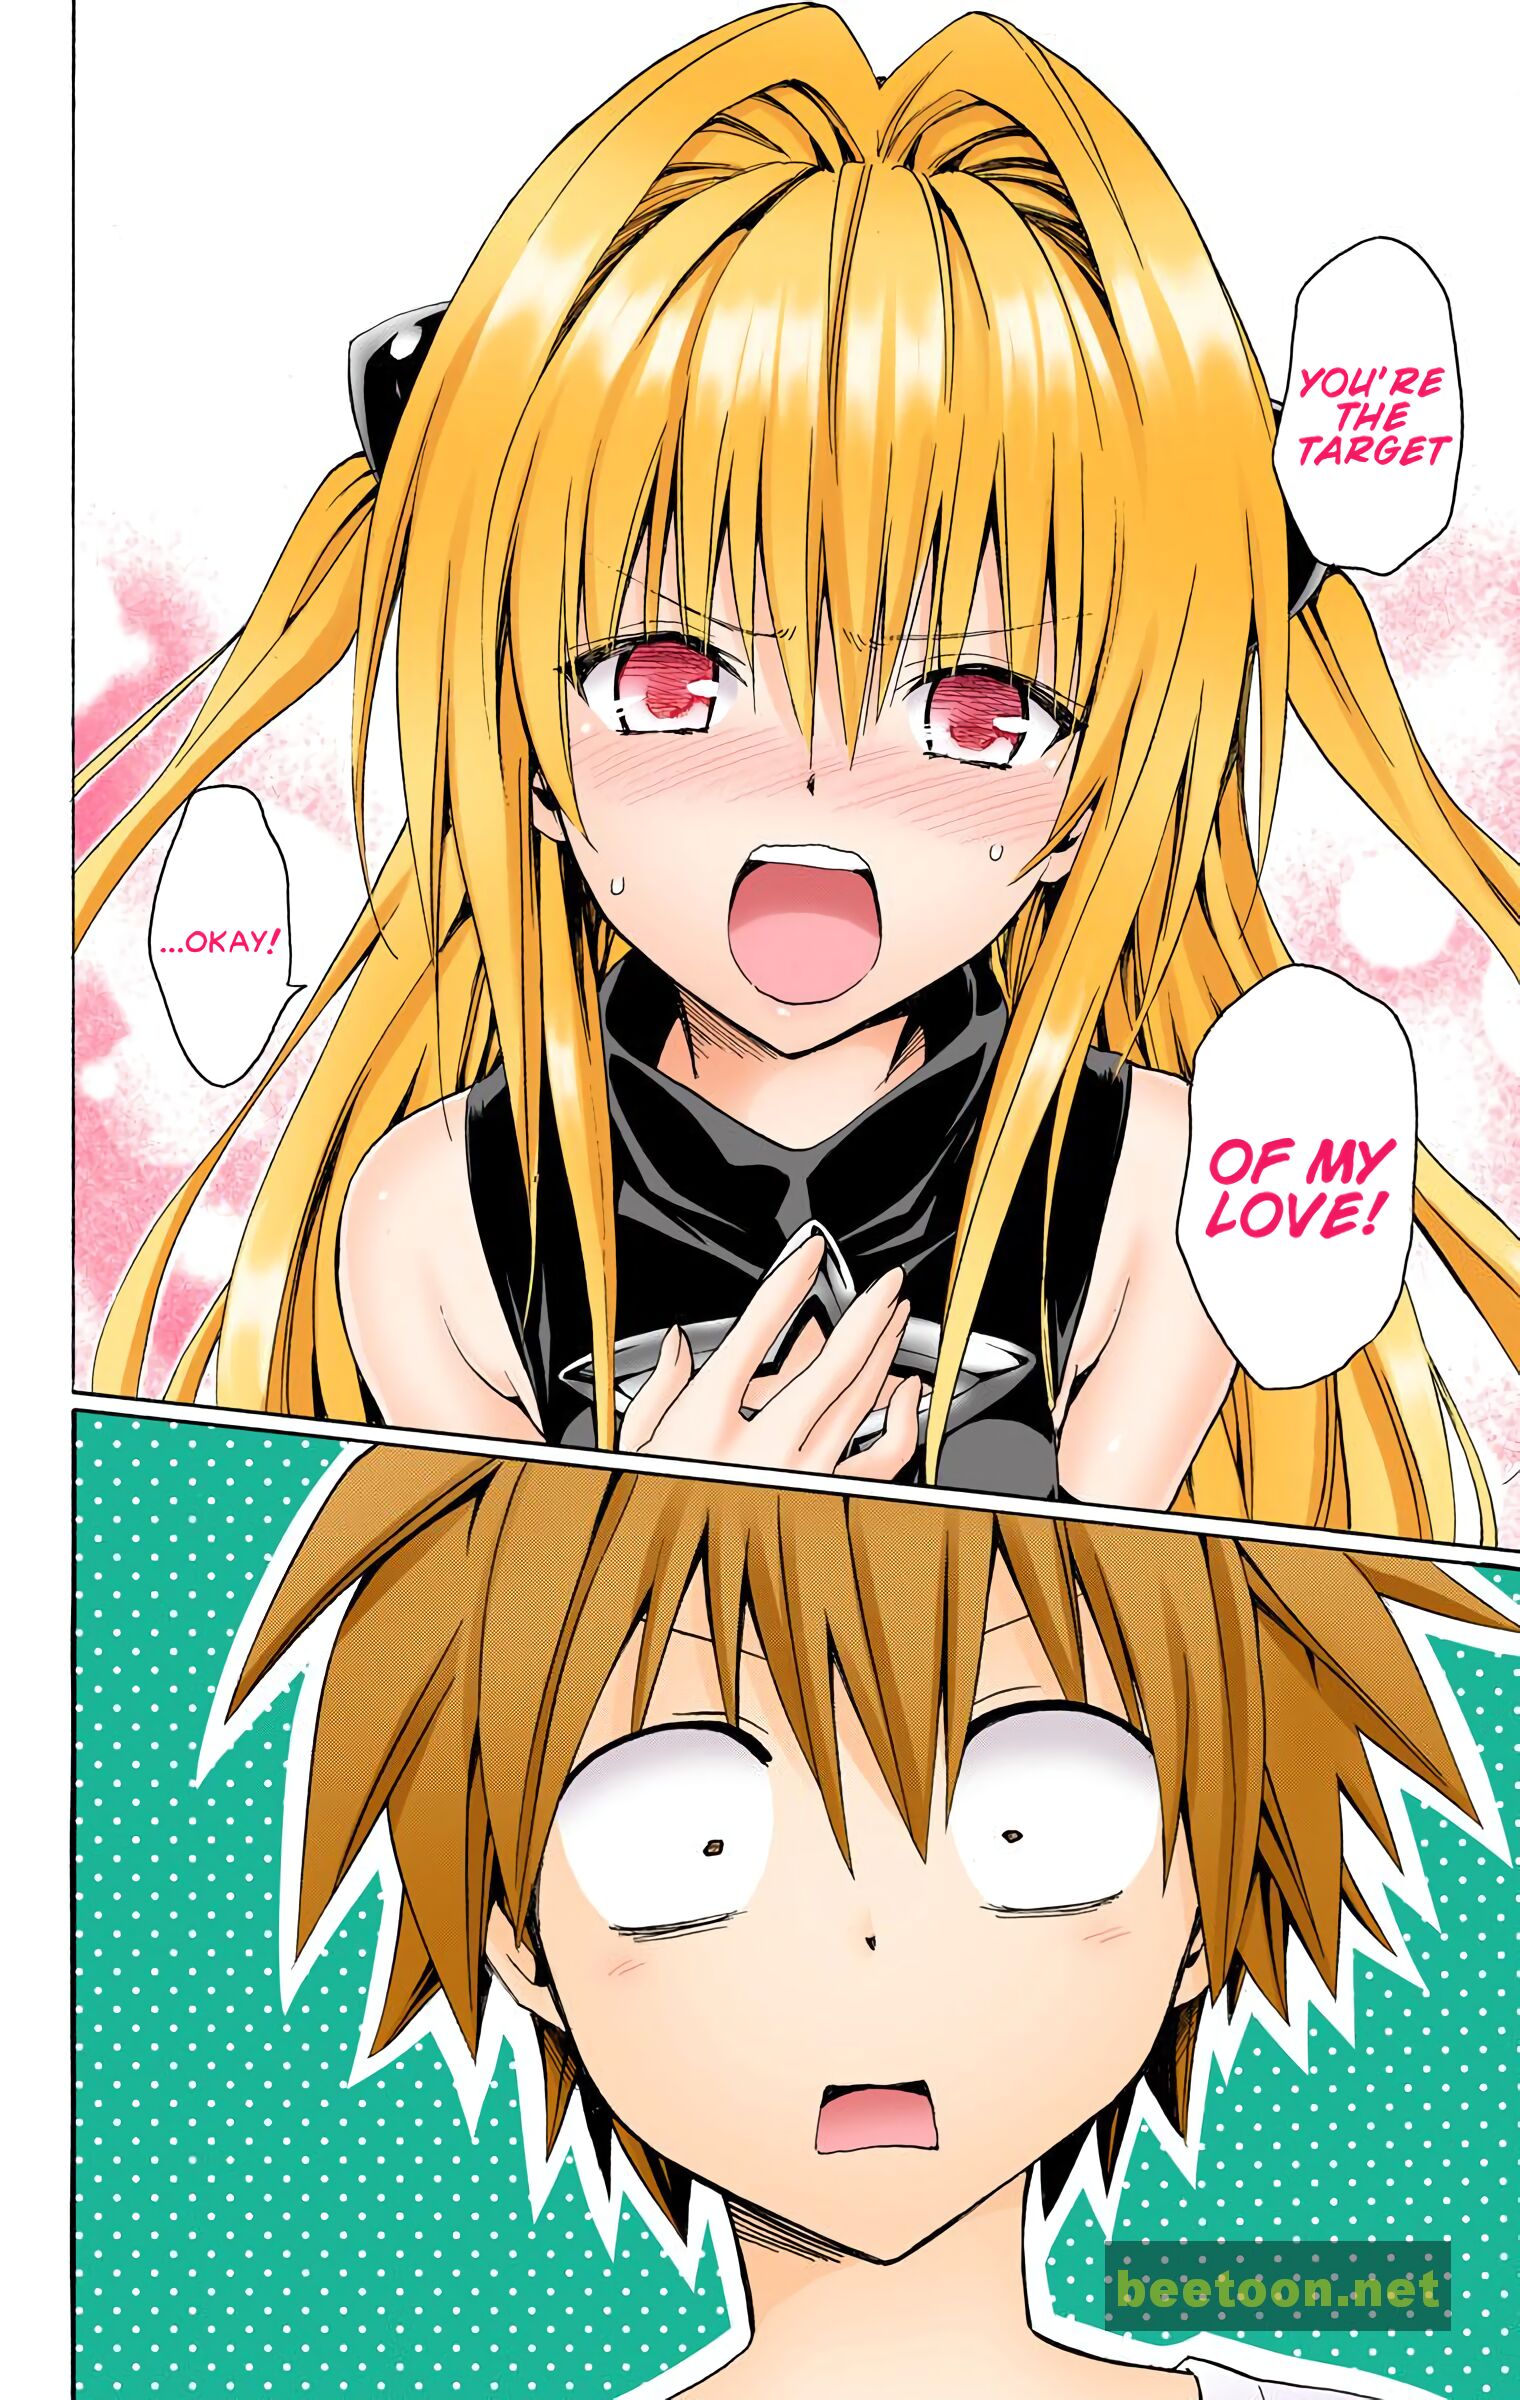 To LOVE-Ru Darkness - Full color Chapter 72 - HolyManga.net